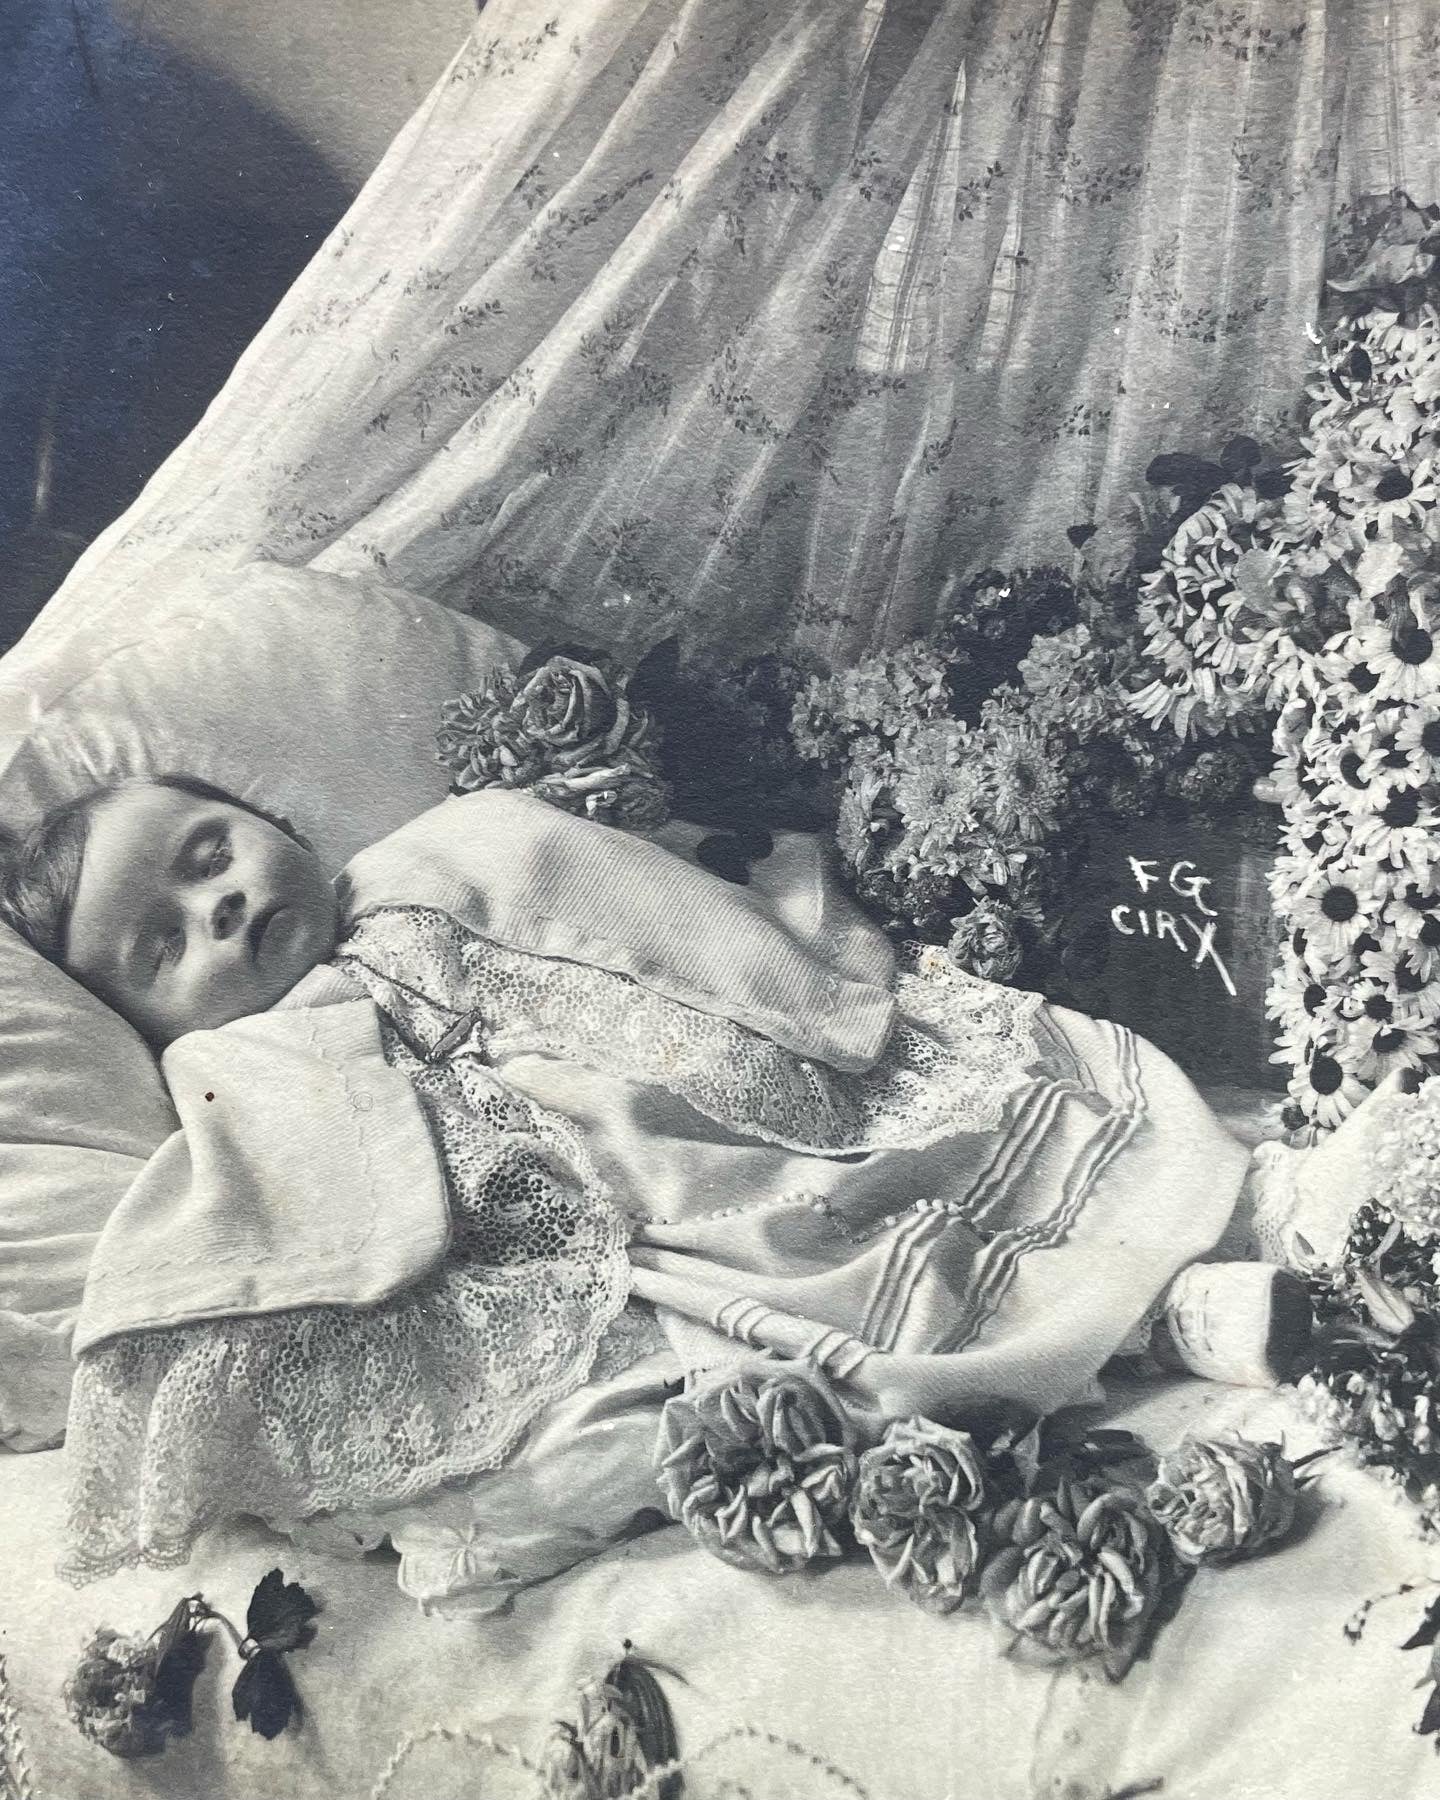 Post Mortem Photo of Baby Surrounded by Flowers